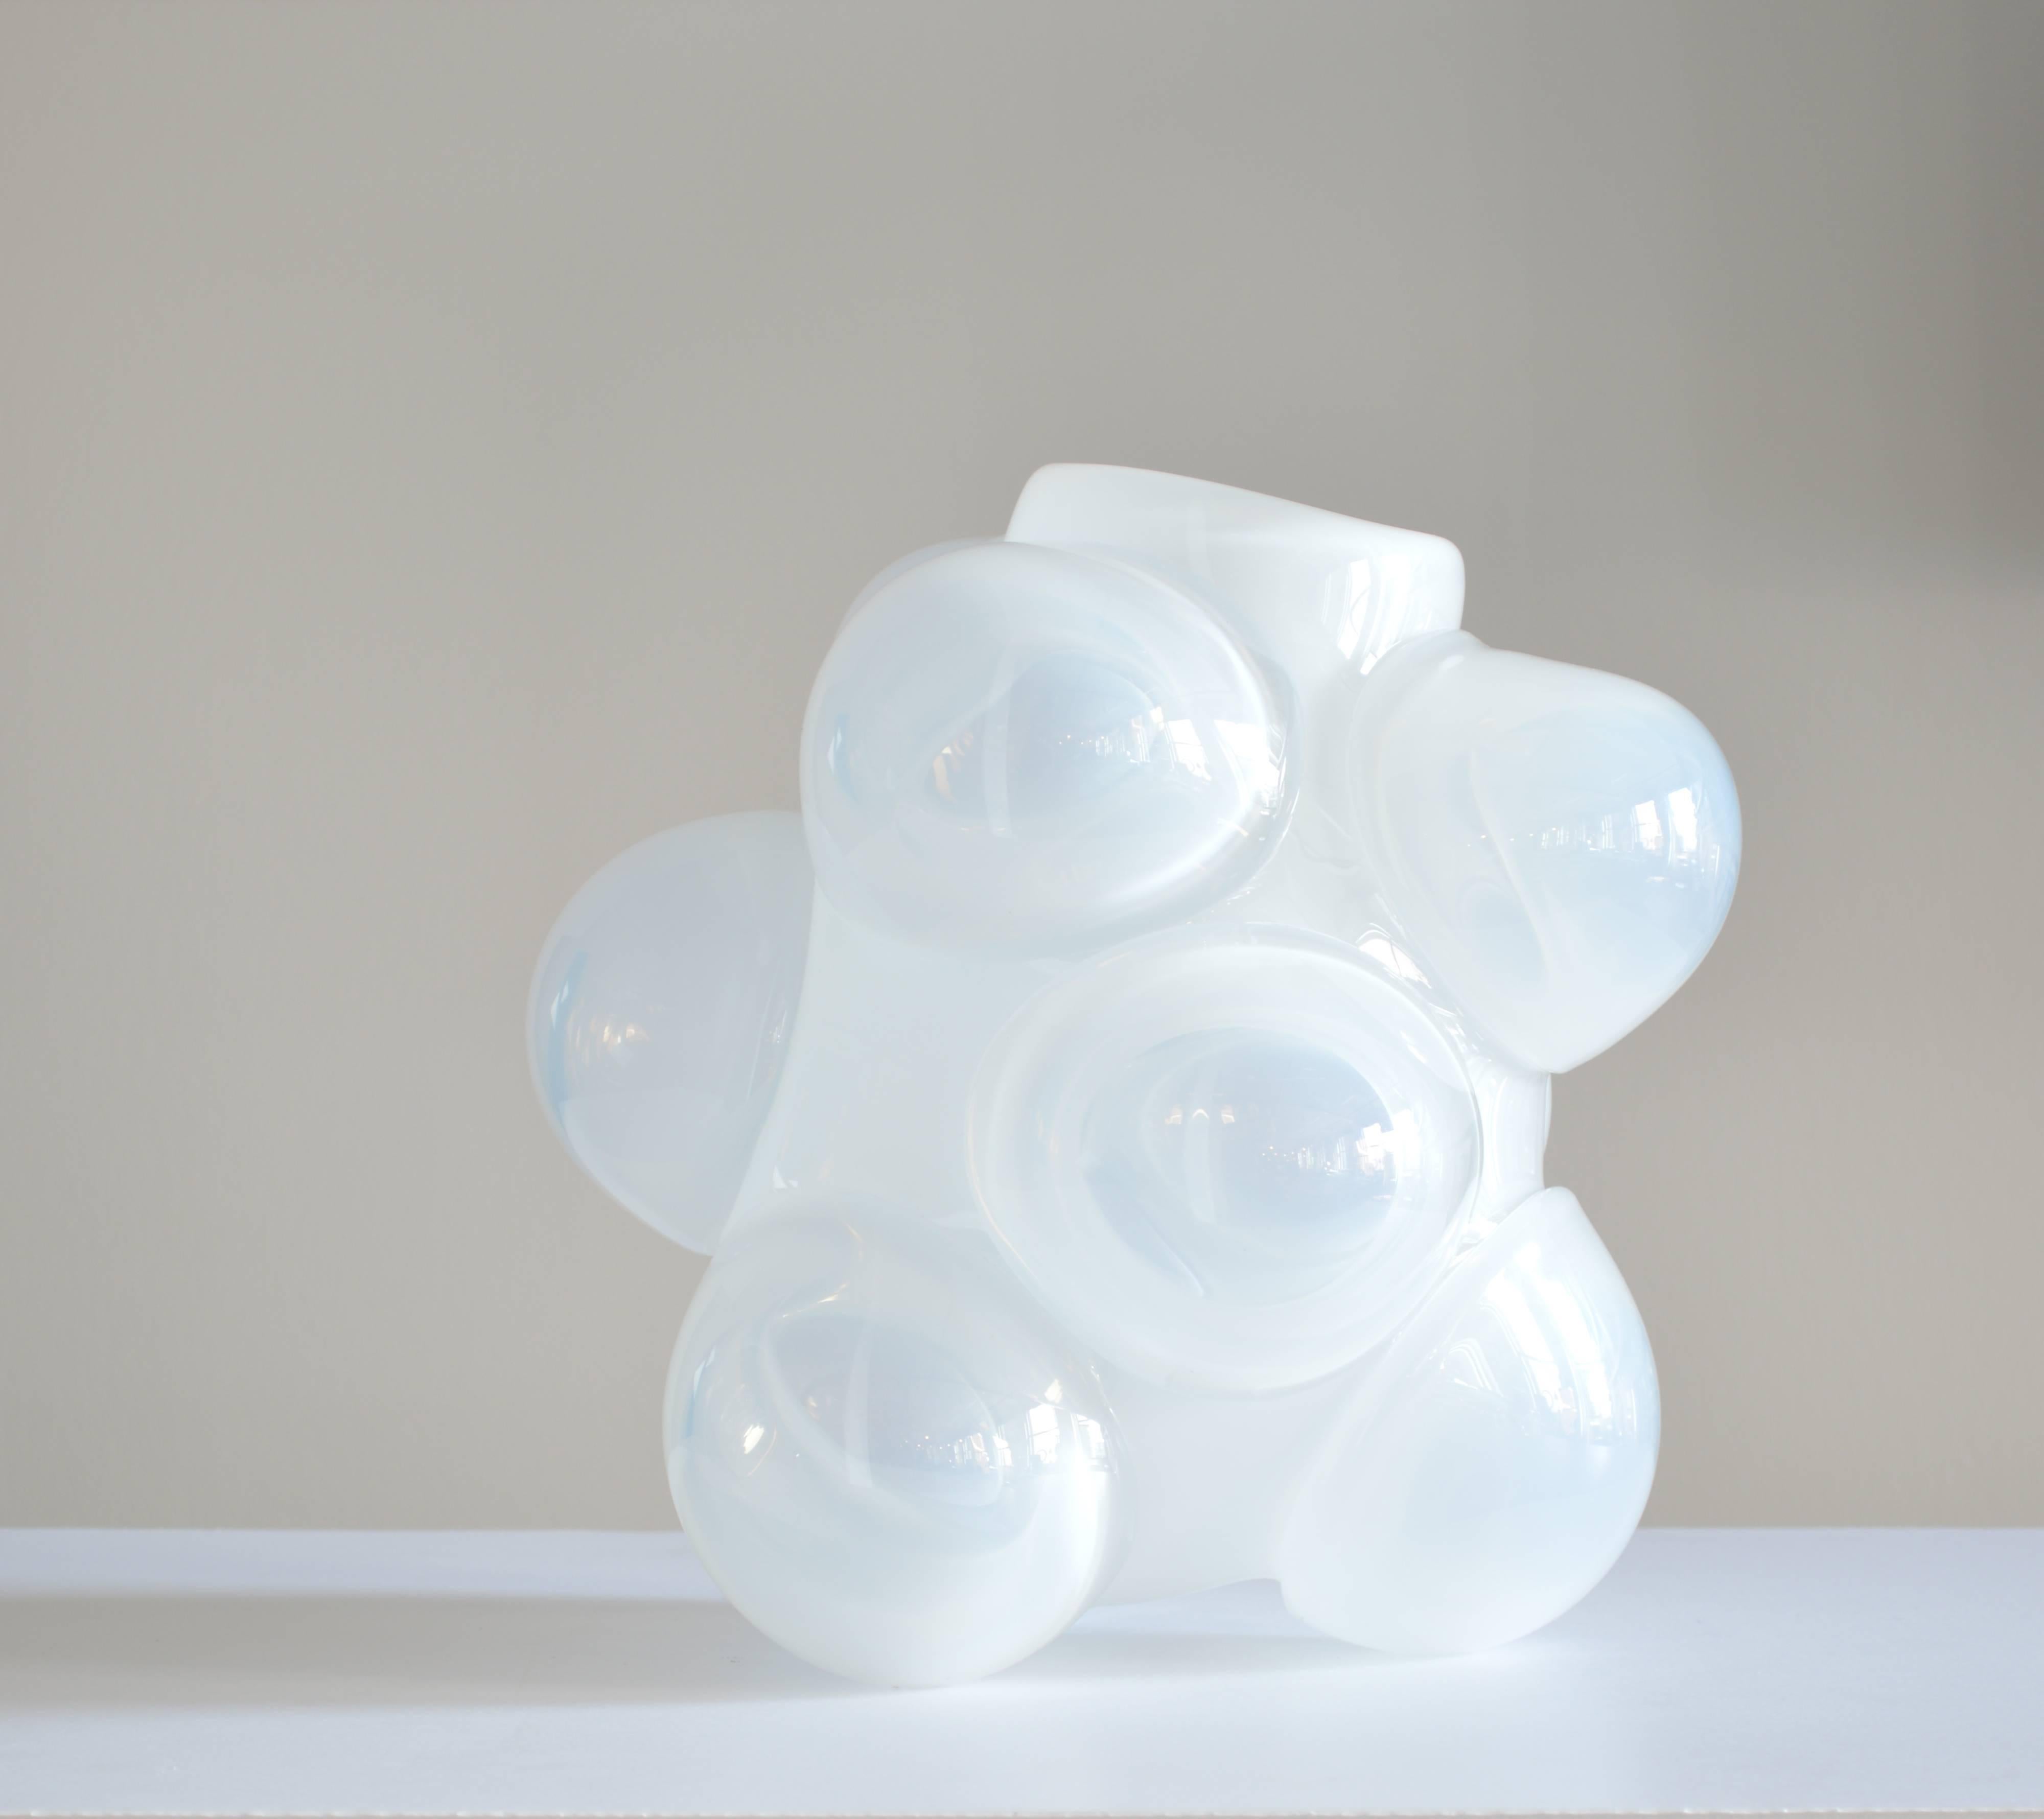 Handblown lead free crystal vase features a central core, with blown glass bubbles, creating a cloud-like shape. The vase made by glassblowers Caleb Siemon and Carmen Salazar in California.